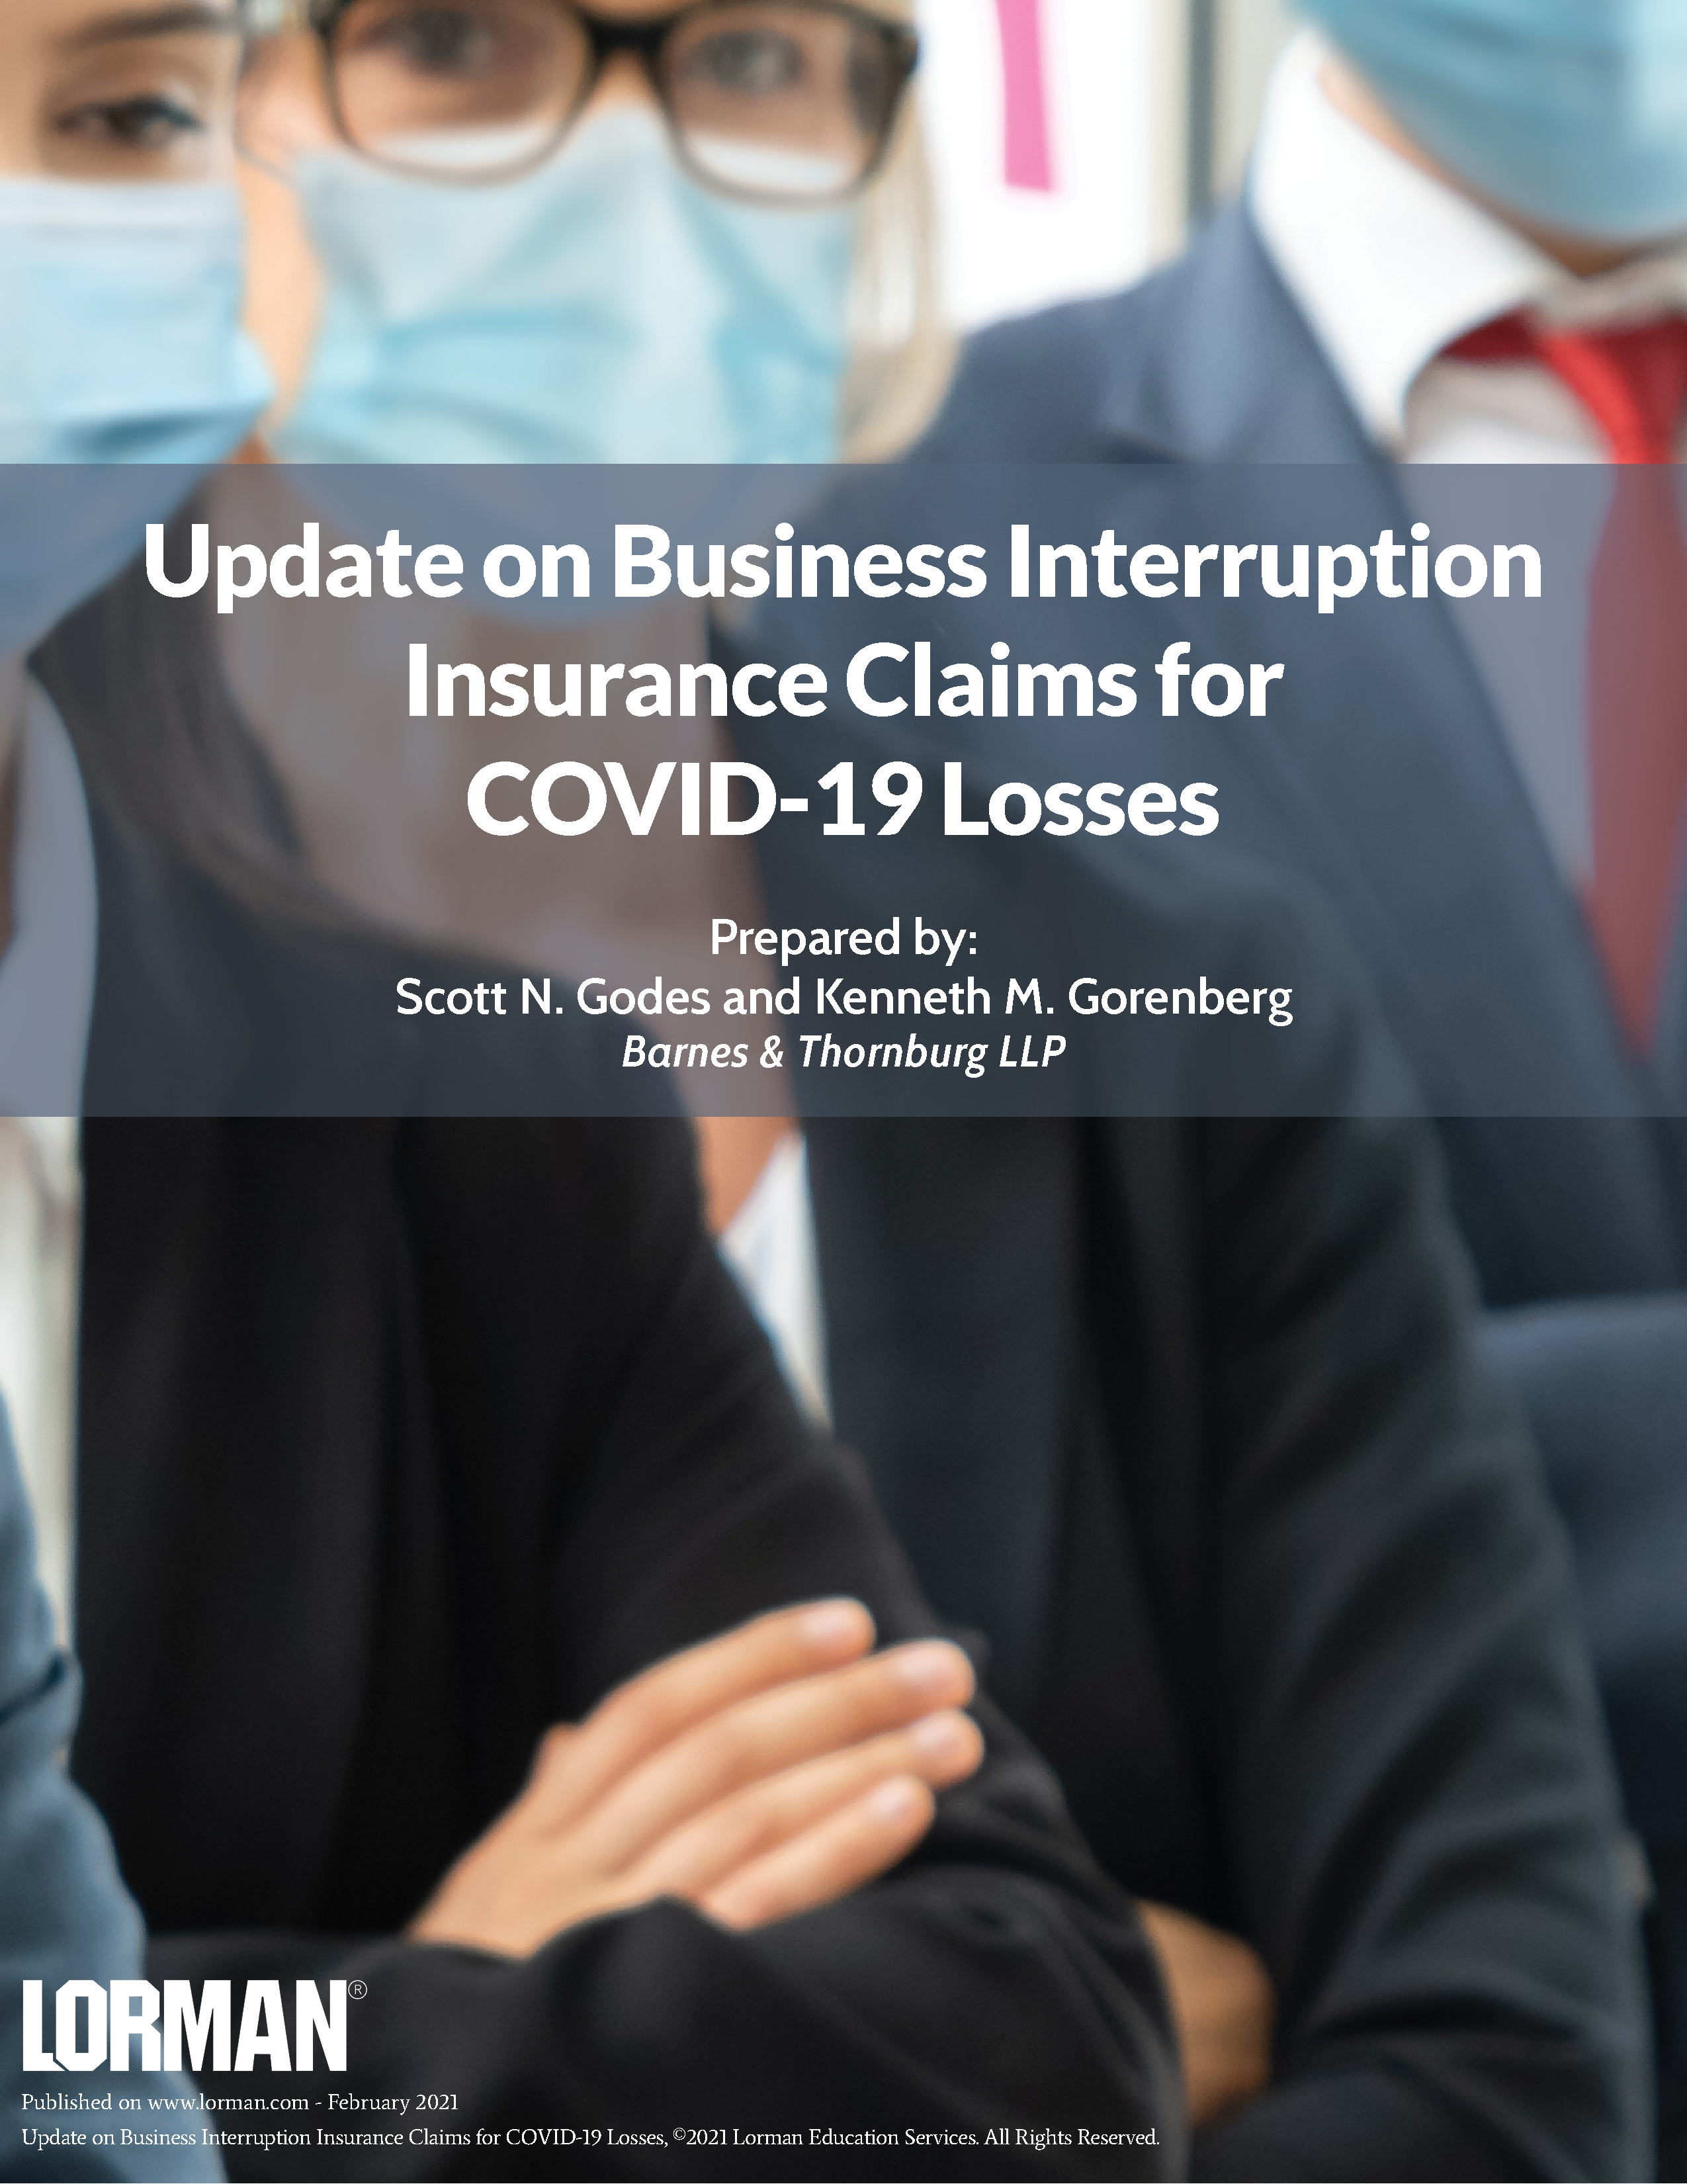 Update on Business Interruption Insurance Claims for COVID-19 Losses